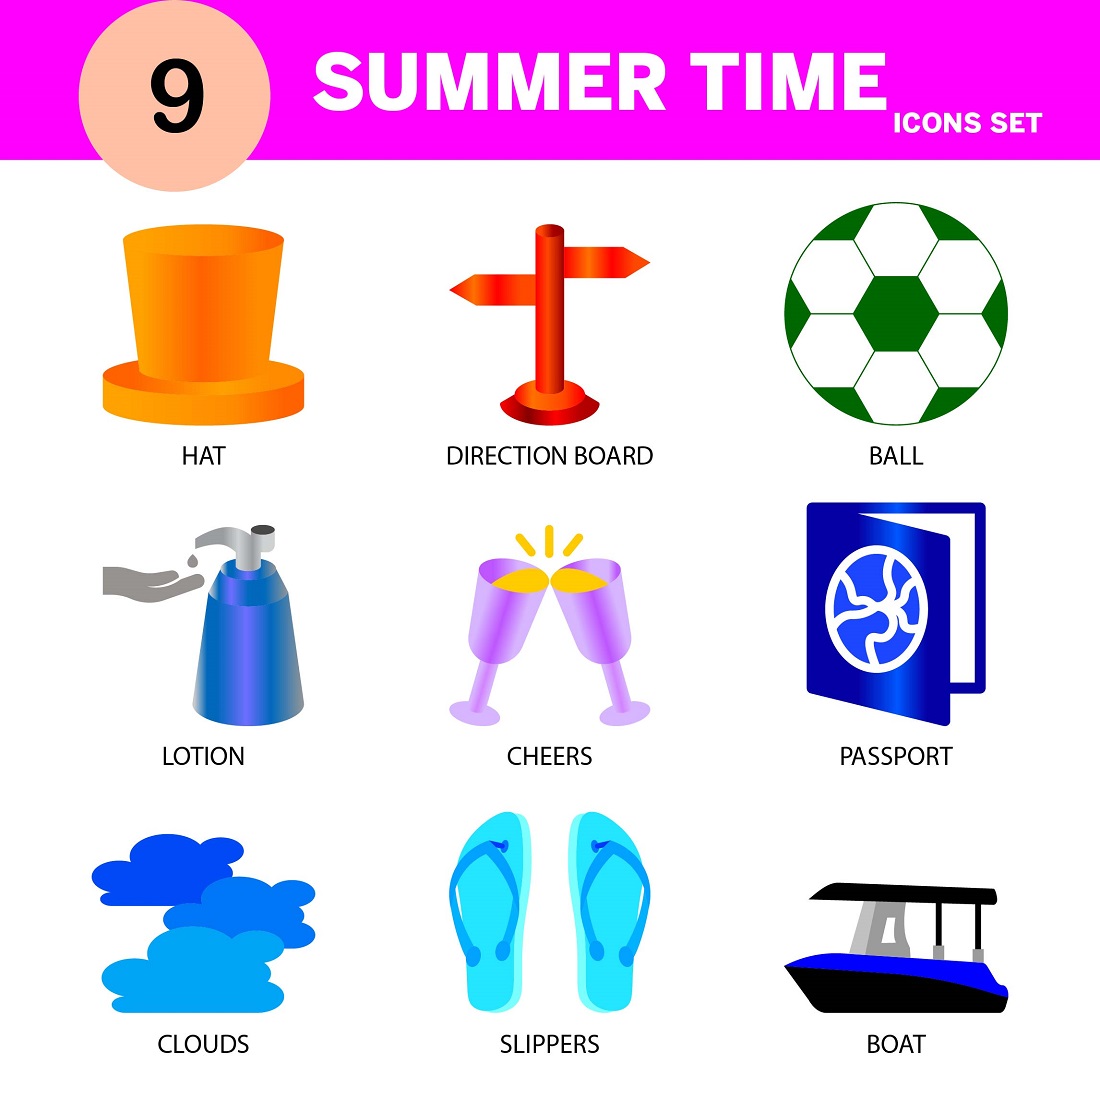 MODERN SUMMER TIME ICON SET EDITABOL AND RICBALE cover image.